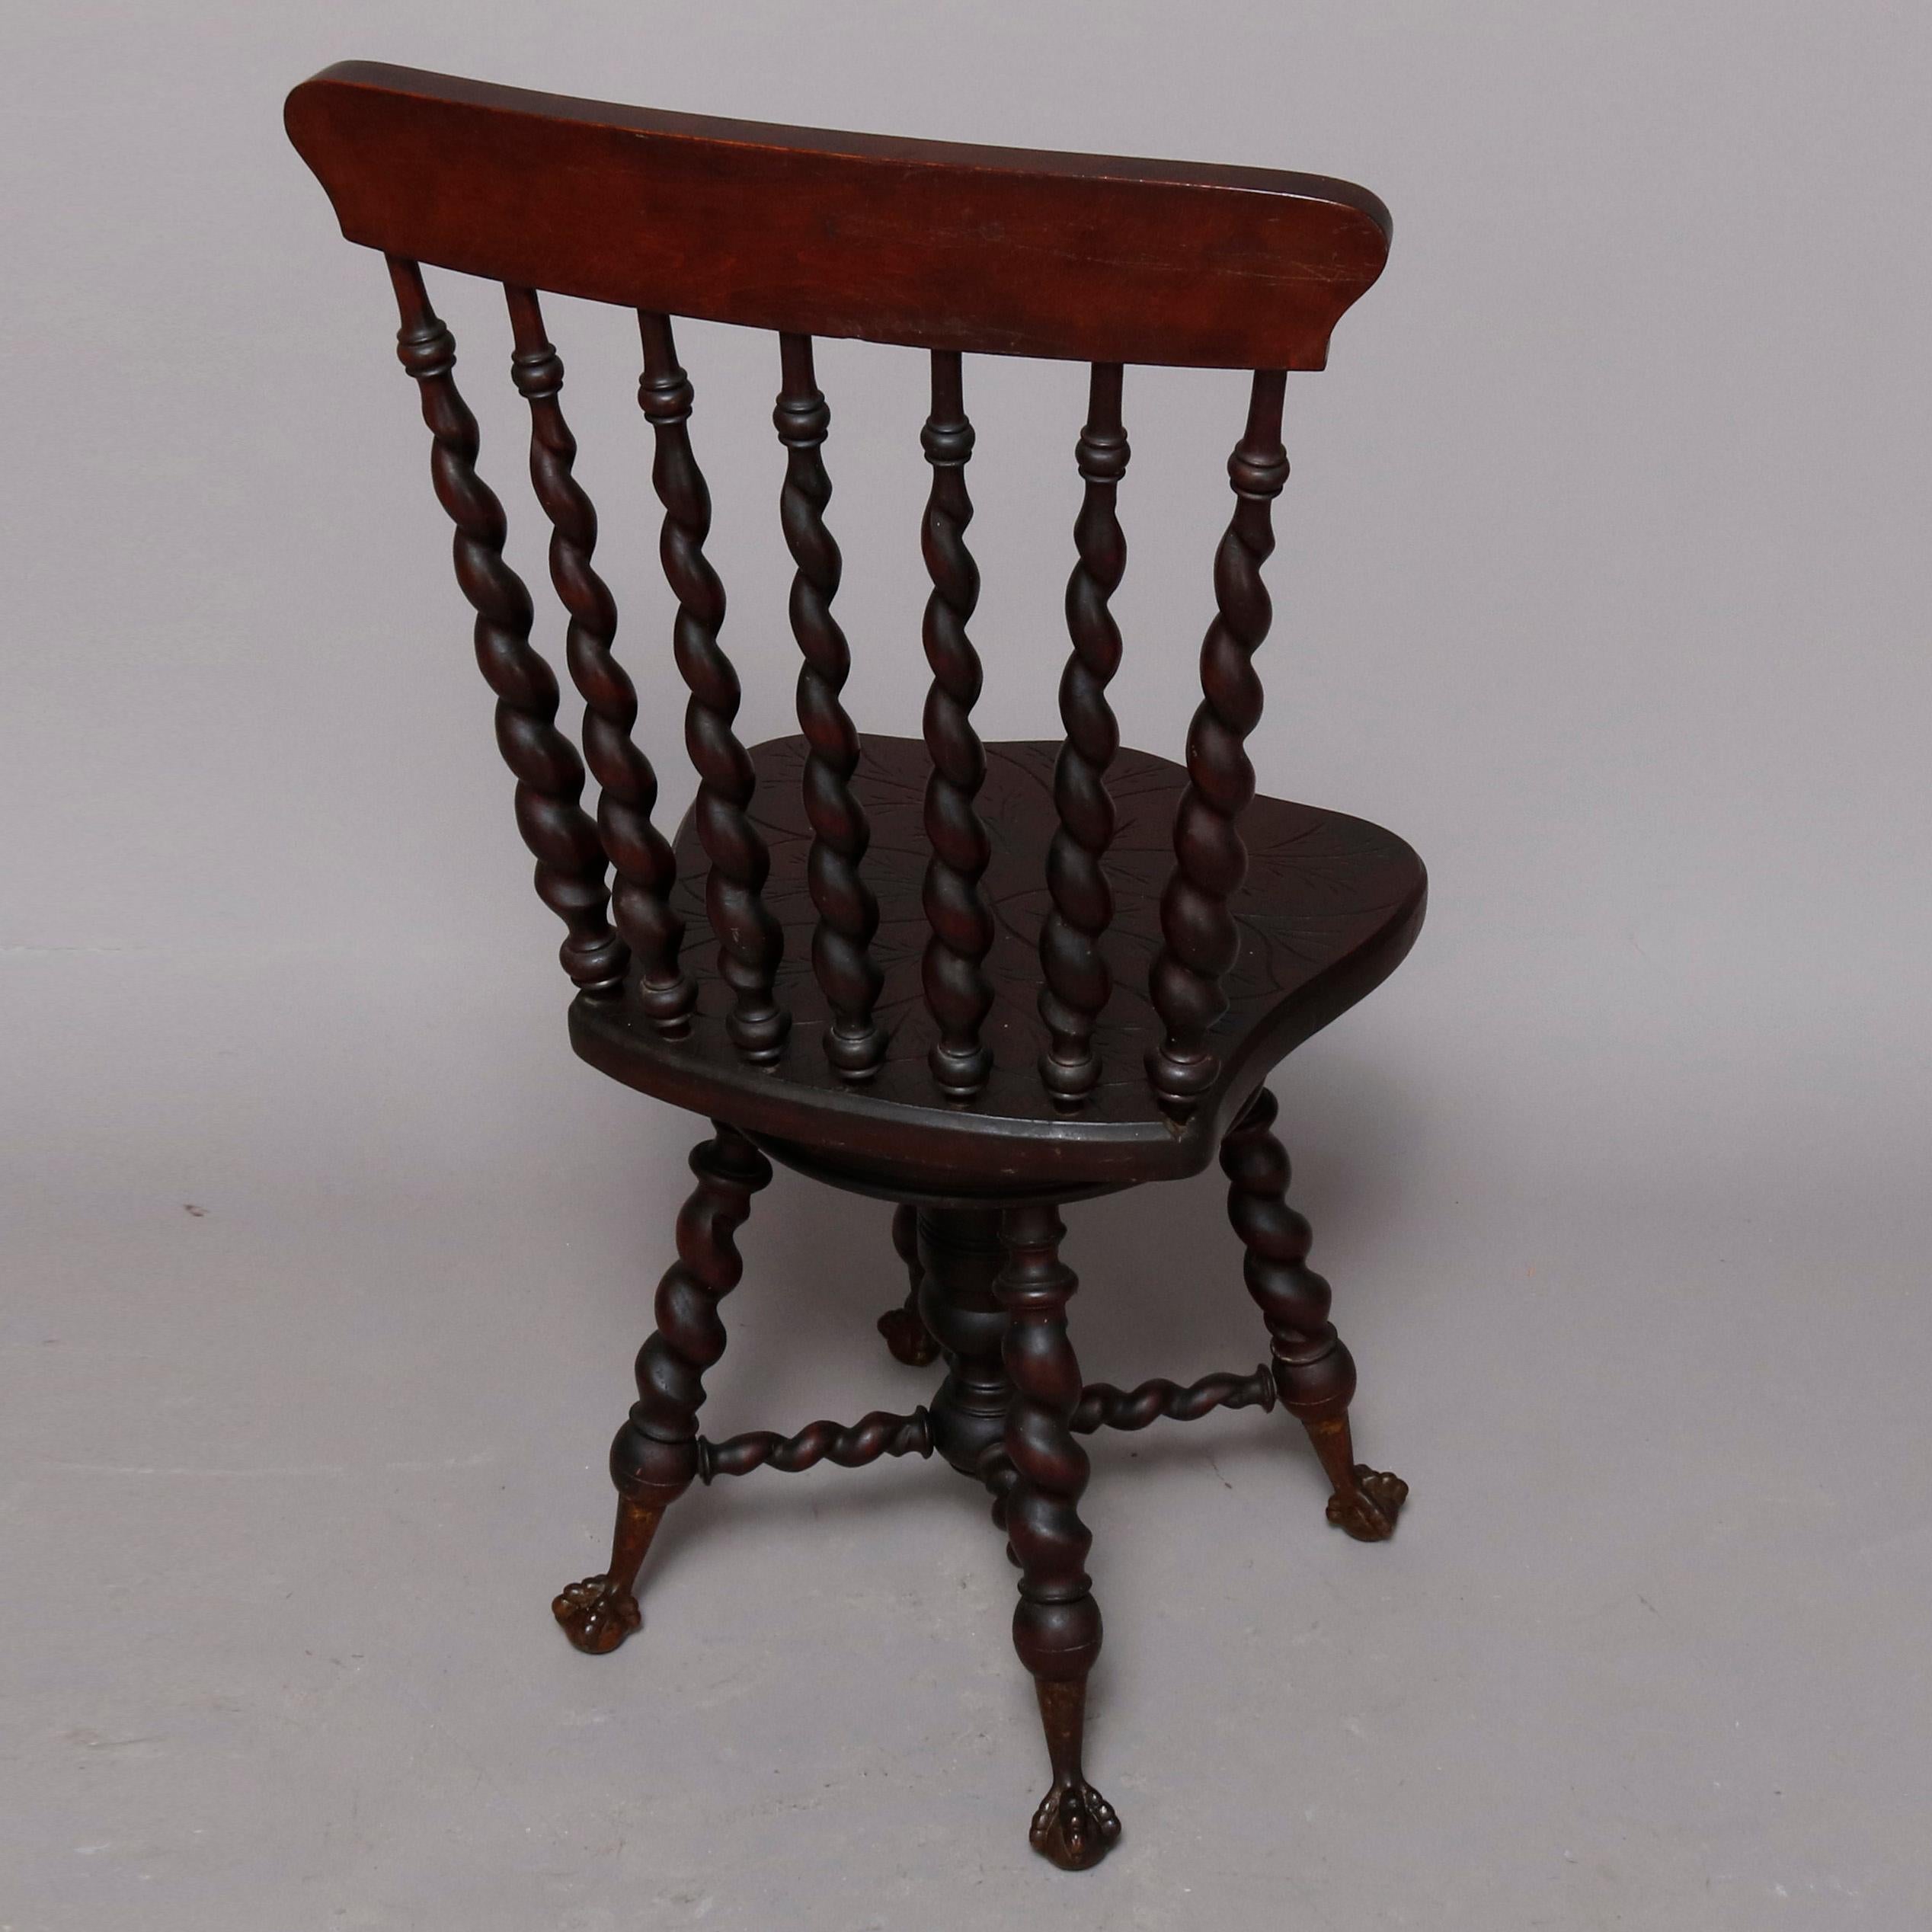 An antique Flint School piano chair features carved mahogany construction with foliate carved crest surmounting barley twist spindle back and adjustable seat, raised on flared barley twist legs terminating in claw and ball feet, circa